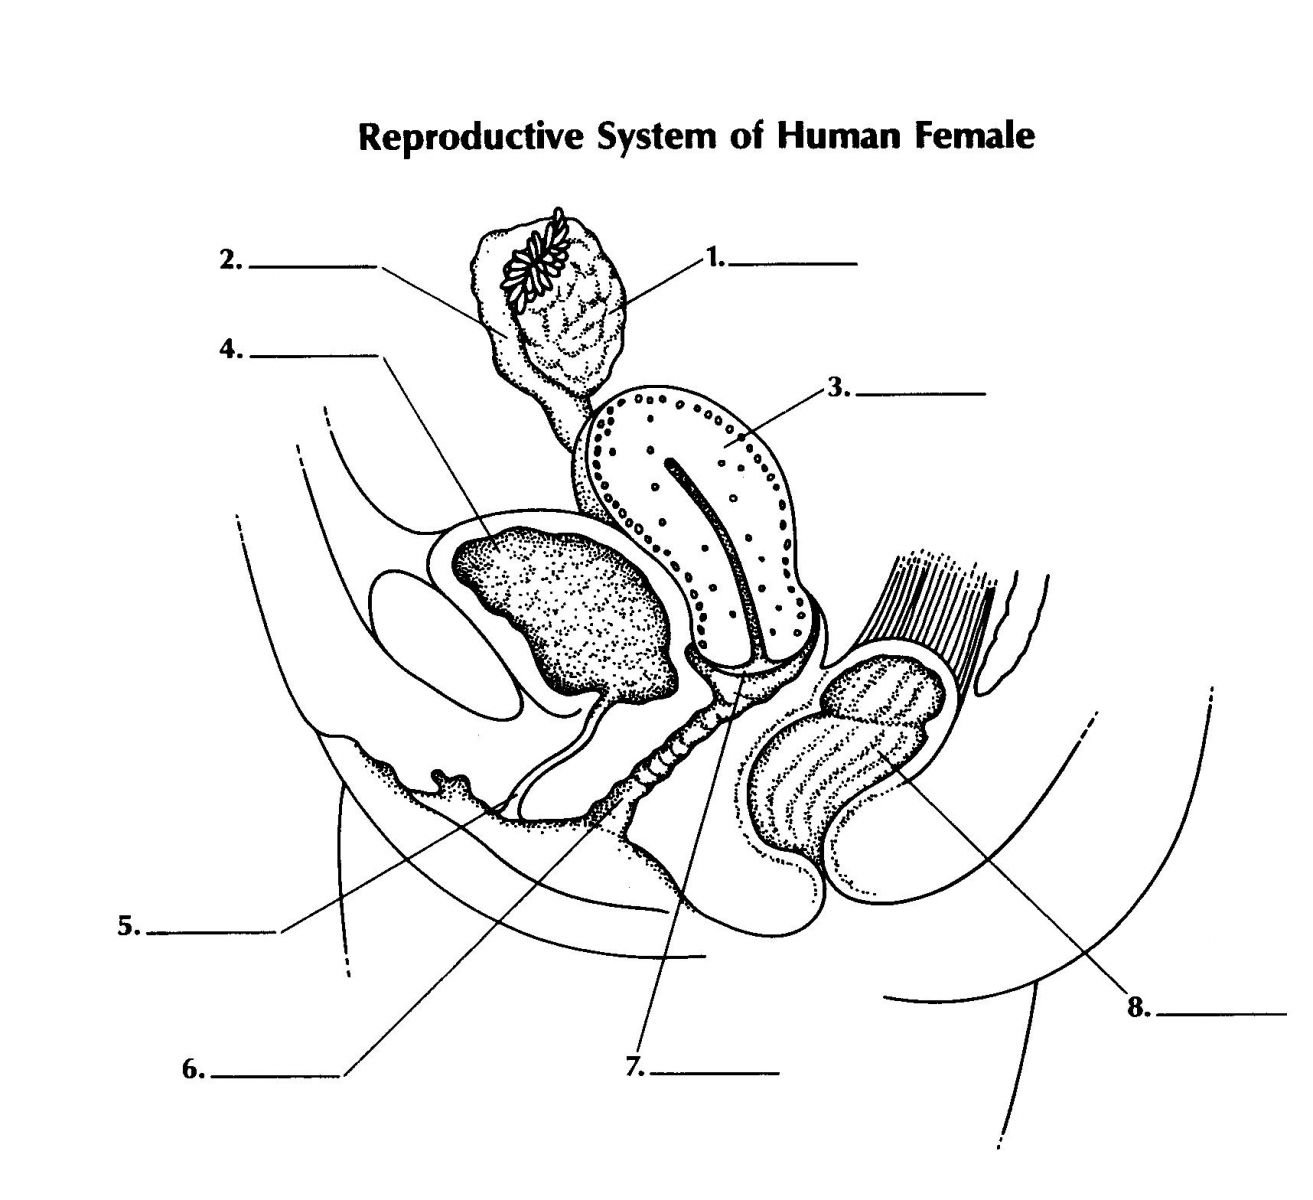 Short Quiz About The Female Reproductive System - ProProfs ...